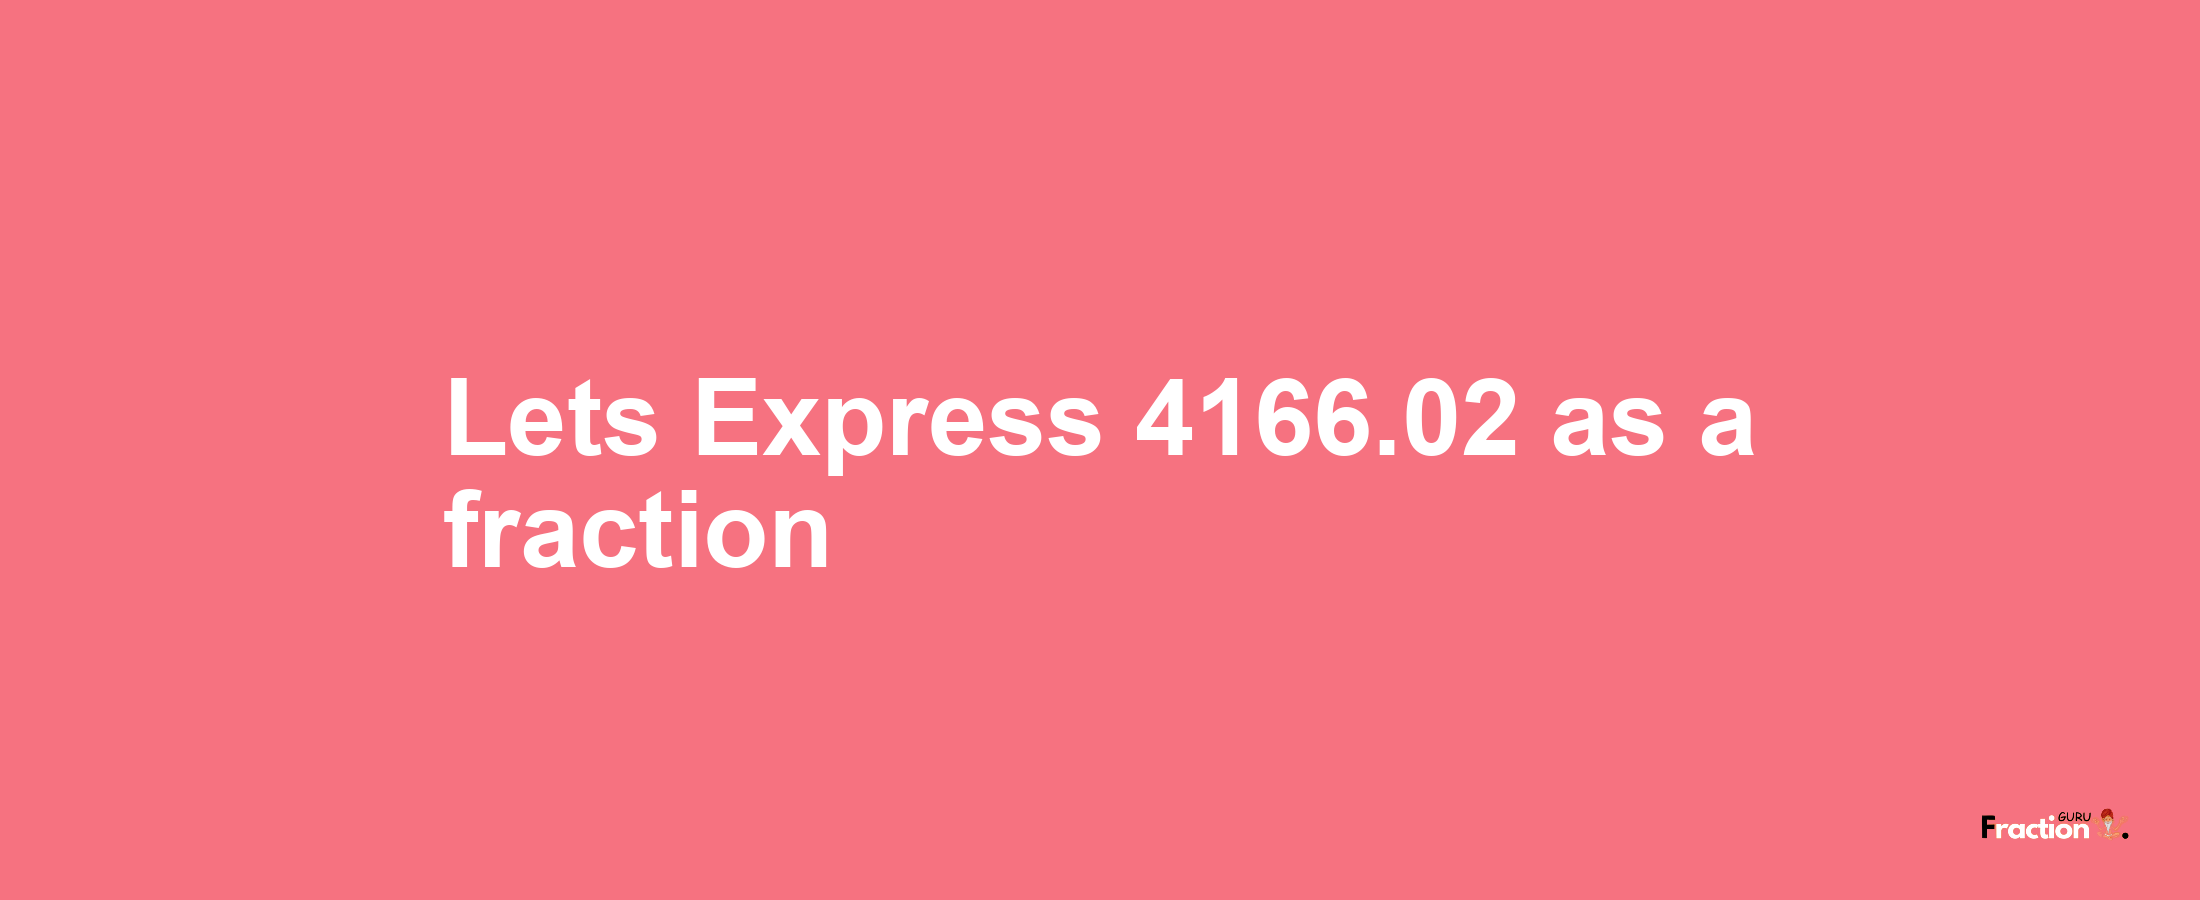 Lets Express 4166.02 as afraction